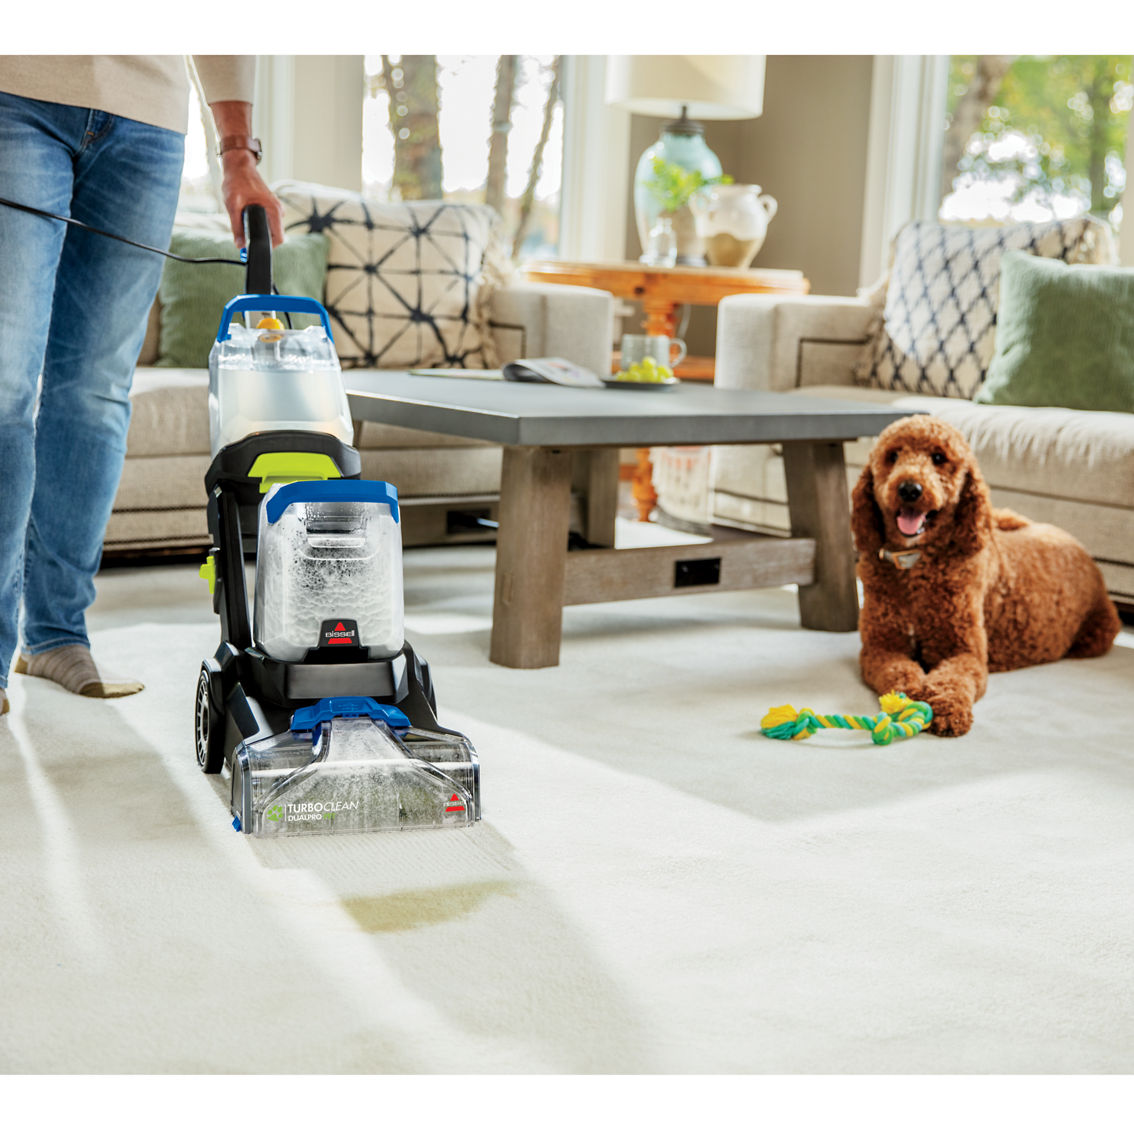 Bissell TurboClean DualPro Pet Carpet Cleaner - Image 5 of 10